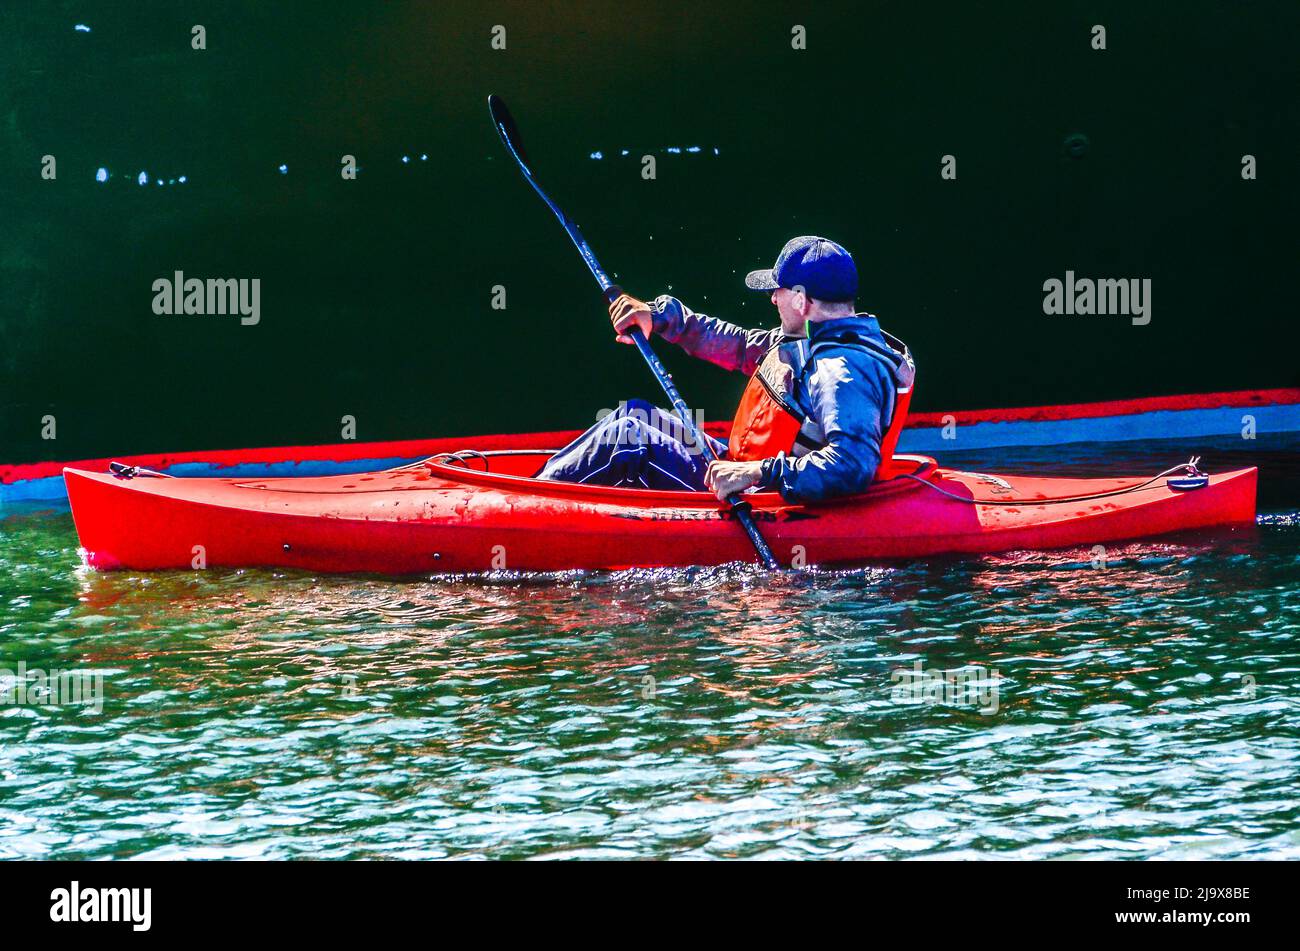 There may be a red line, but this man is no red liner, for sure. He just out to enjoy a ride in his Kayak and slowly paddle this Spring day away. Stock Photo